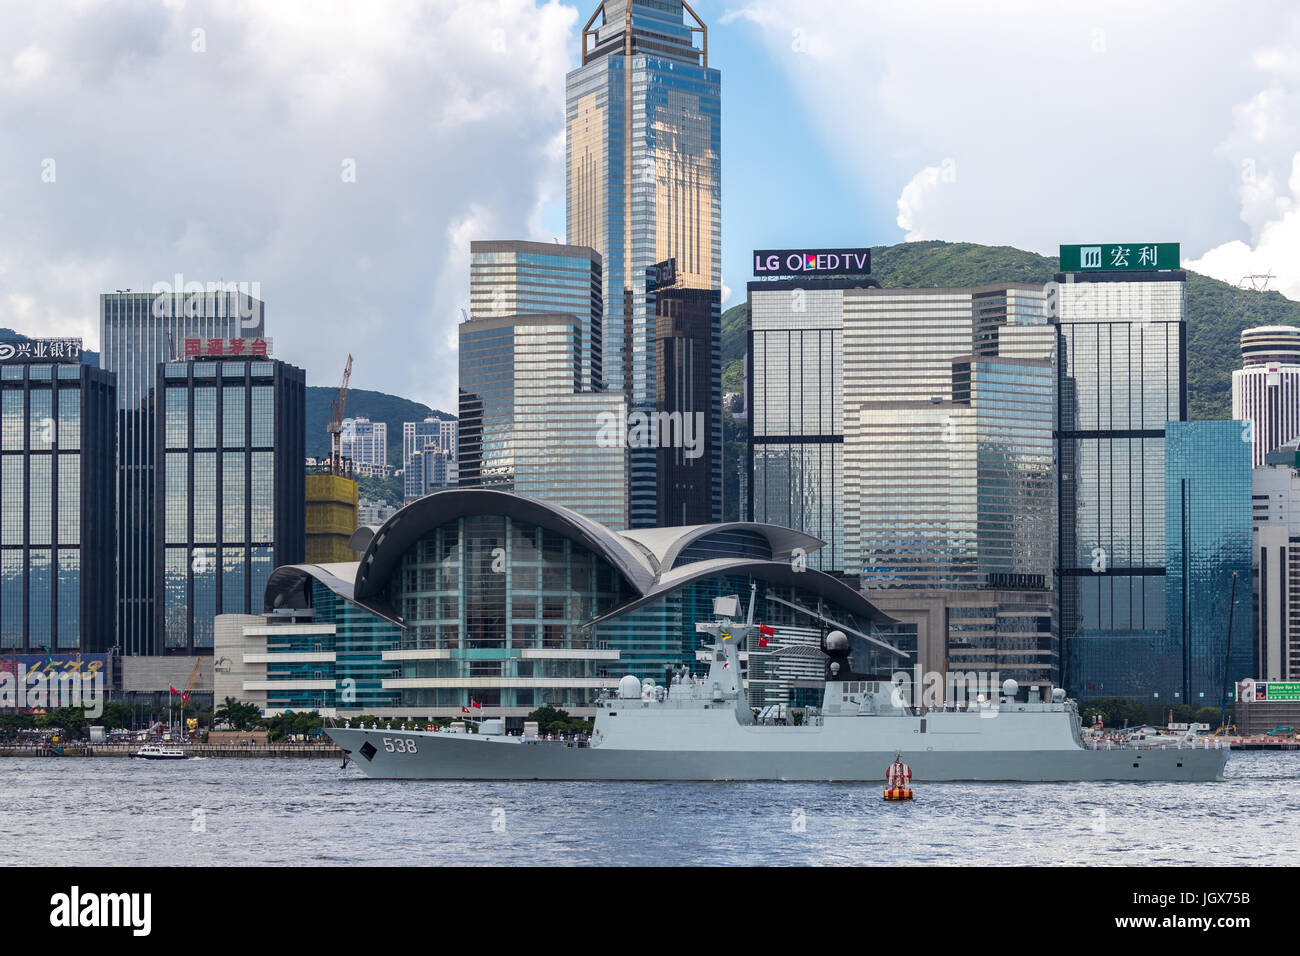 Victoria Harbour, Hong Kong. 11th June, 2017. Yantai (number 538) multi-role frigate acrossed Victoria harbour of Hong Kong returning naval base in mainland of China. Credit: Earnest Tse/Alamy Live News Credit: Earnest Tse/Alamy Live News Stock Photo